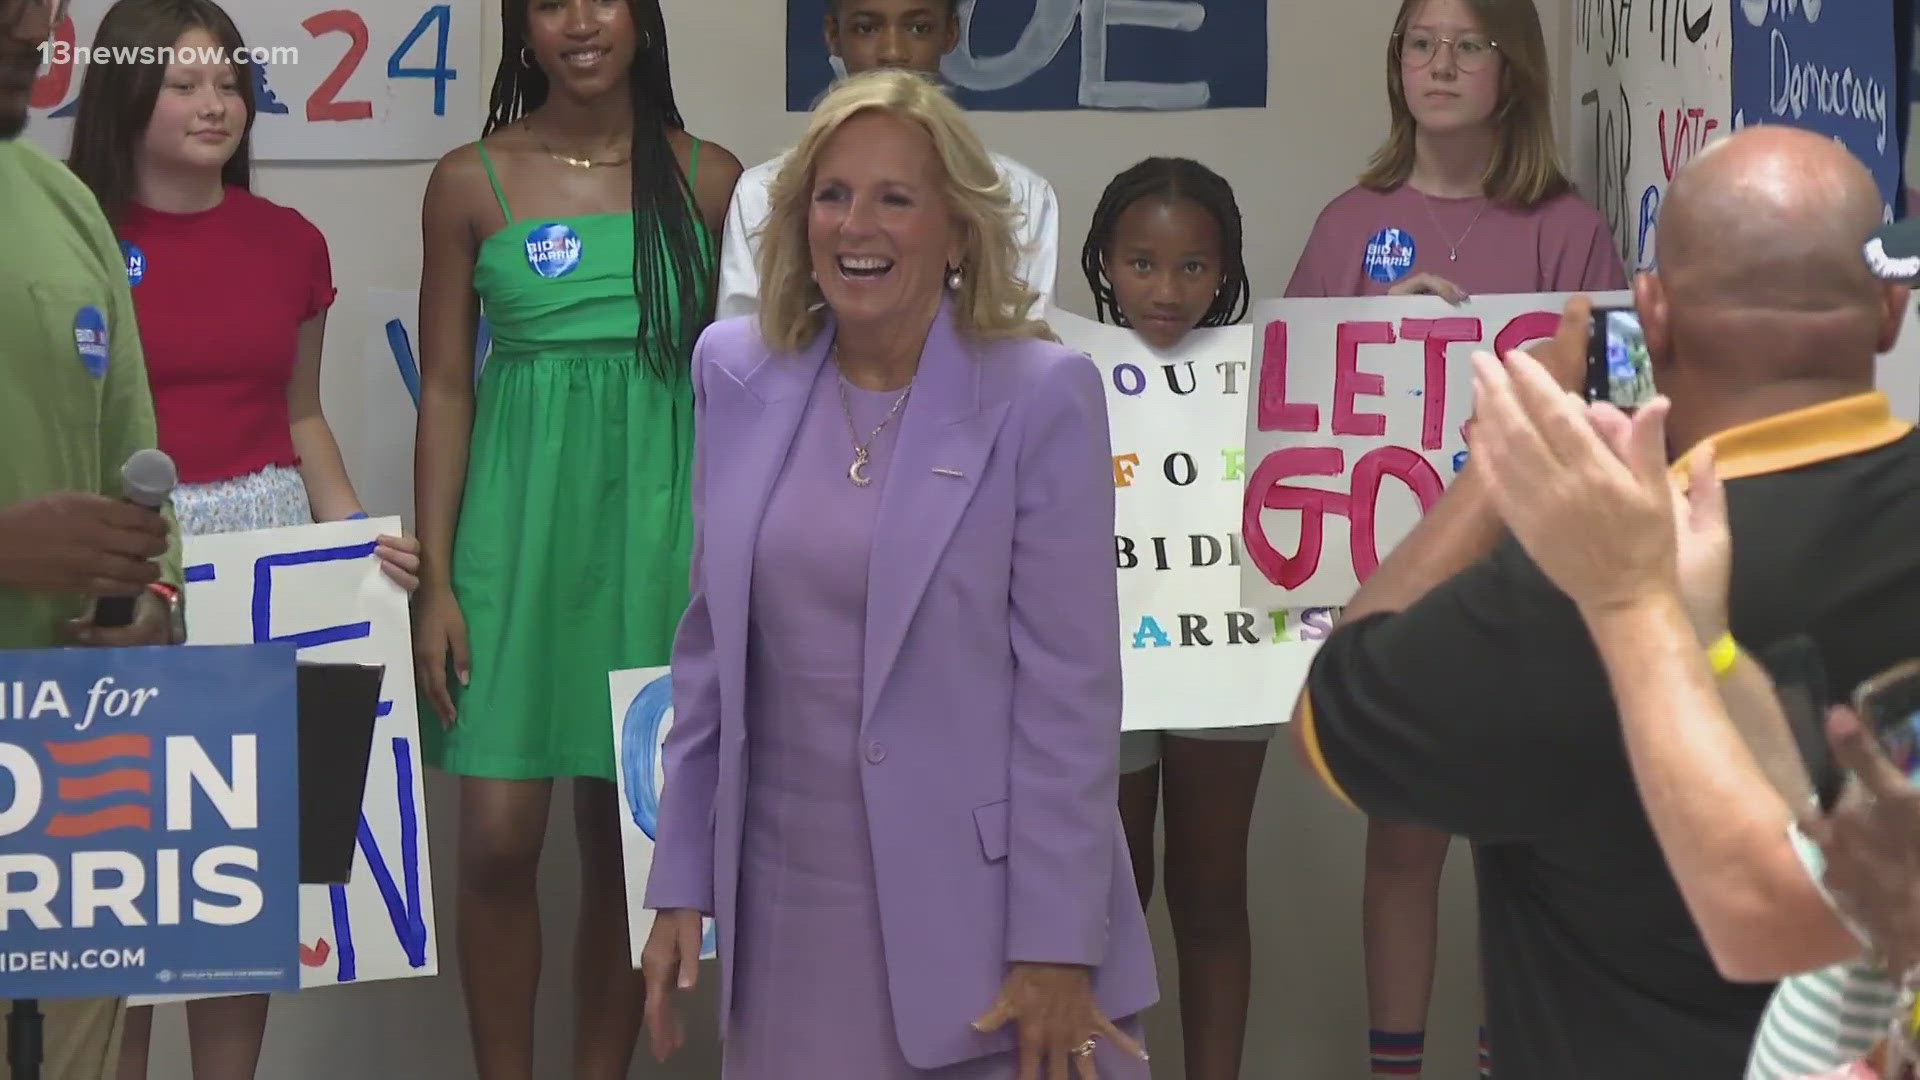 Here in Virginia Beach, Dr.Jill Biden urged voters to show their support for President Joe Biden, saying the future of America is at stake.